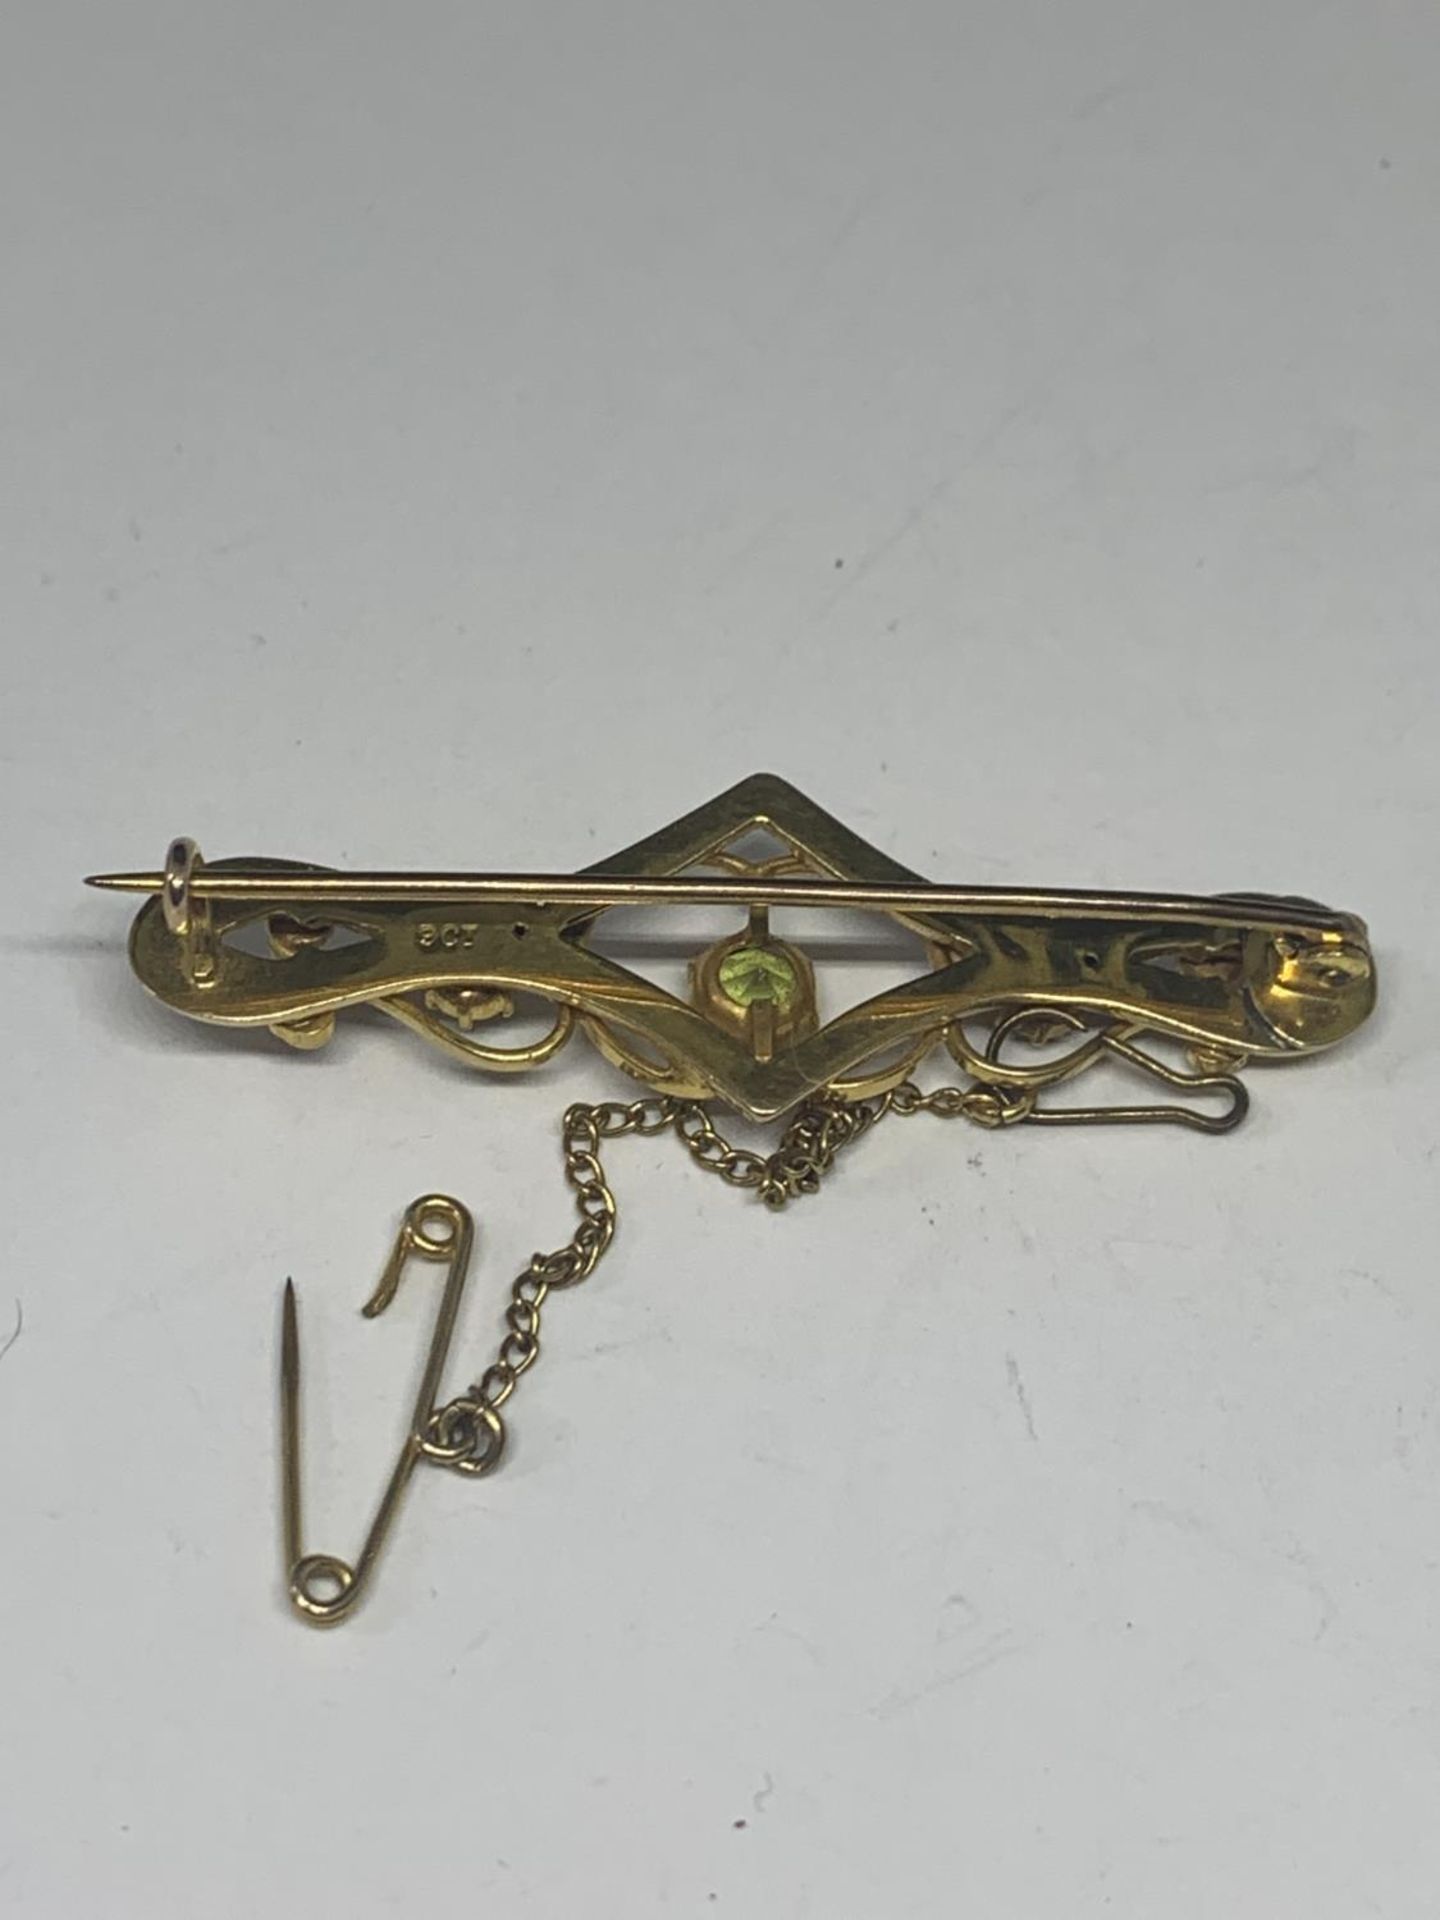 A 9 CARAT GOLD VICTORIAN BROOCH WITH PALE GREEN STONES AND A SAFETY CHAIN GROSS WEIGHT 2.97 GRAMS - Image 3 of 6